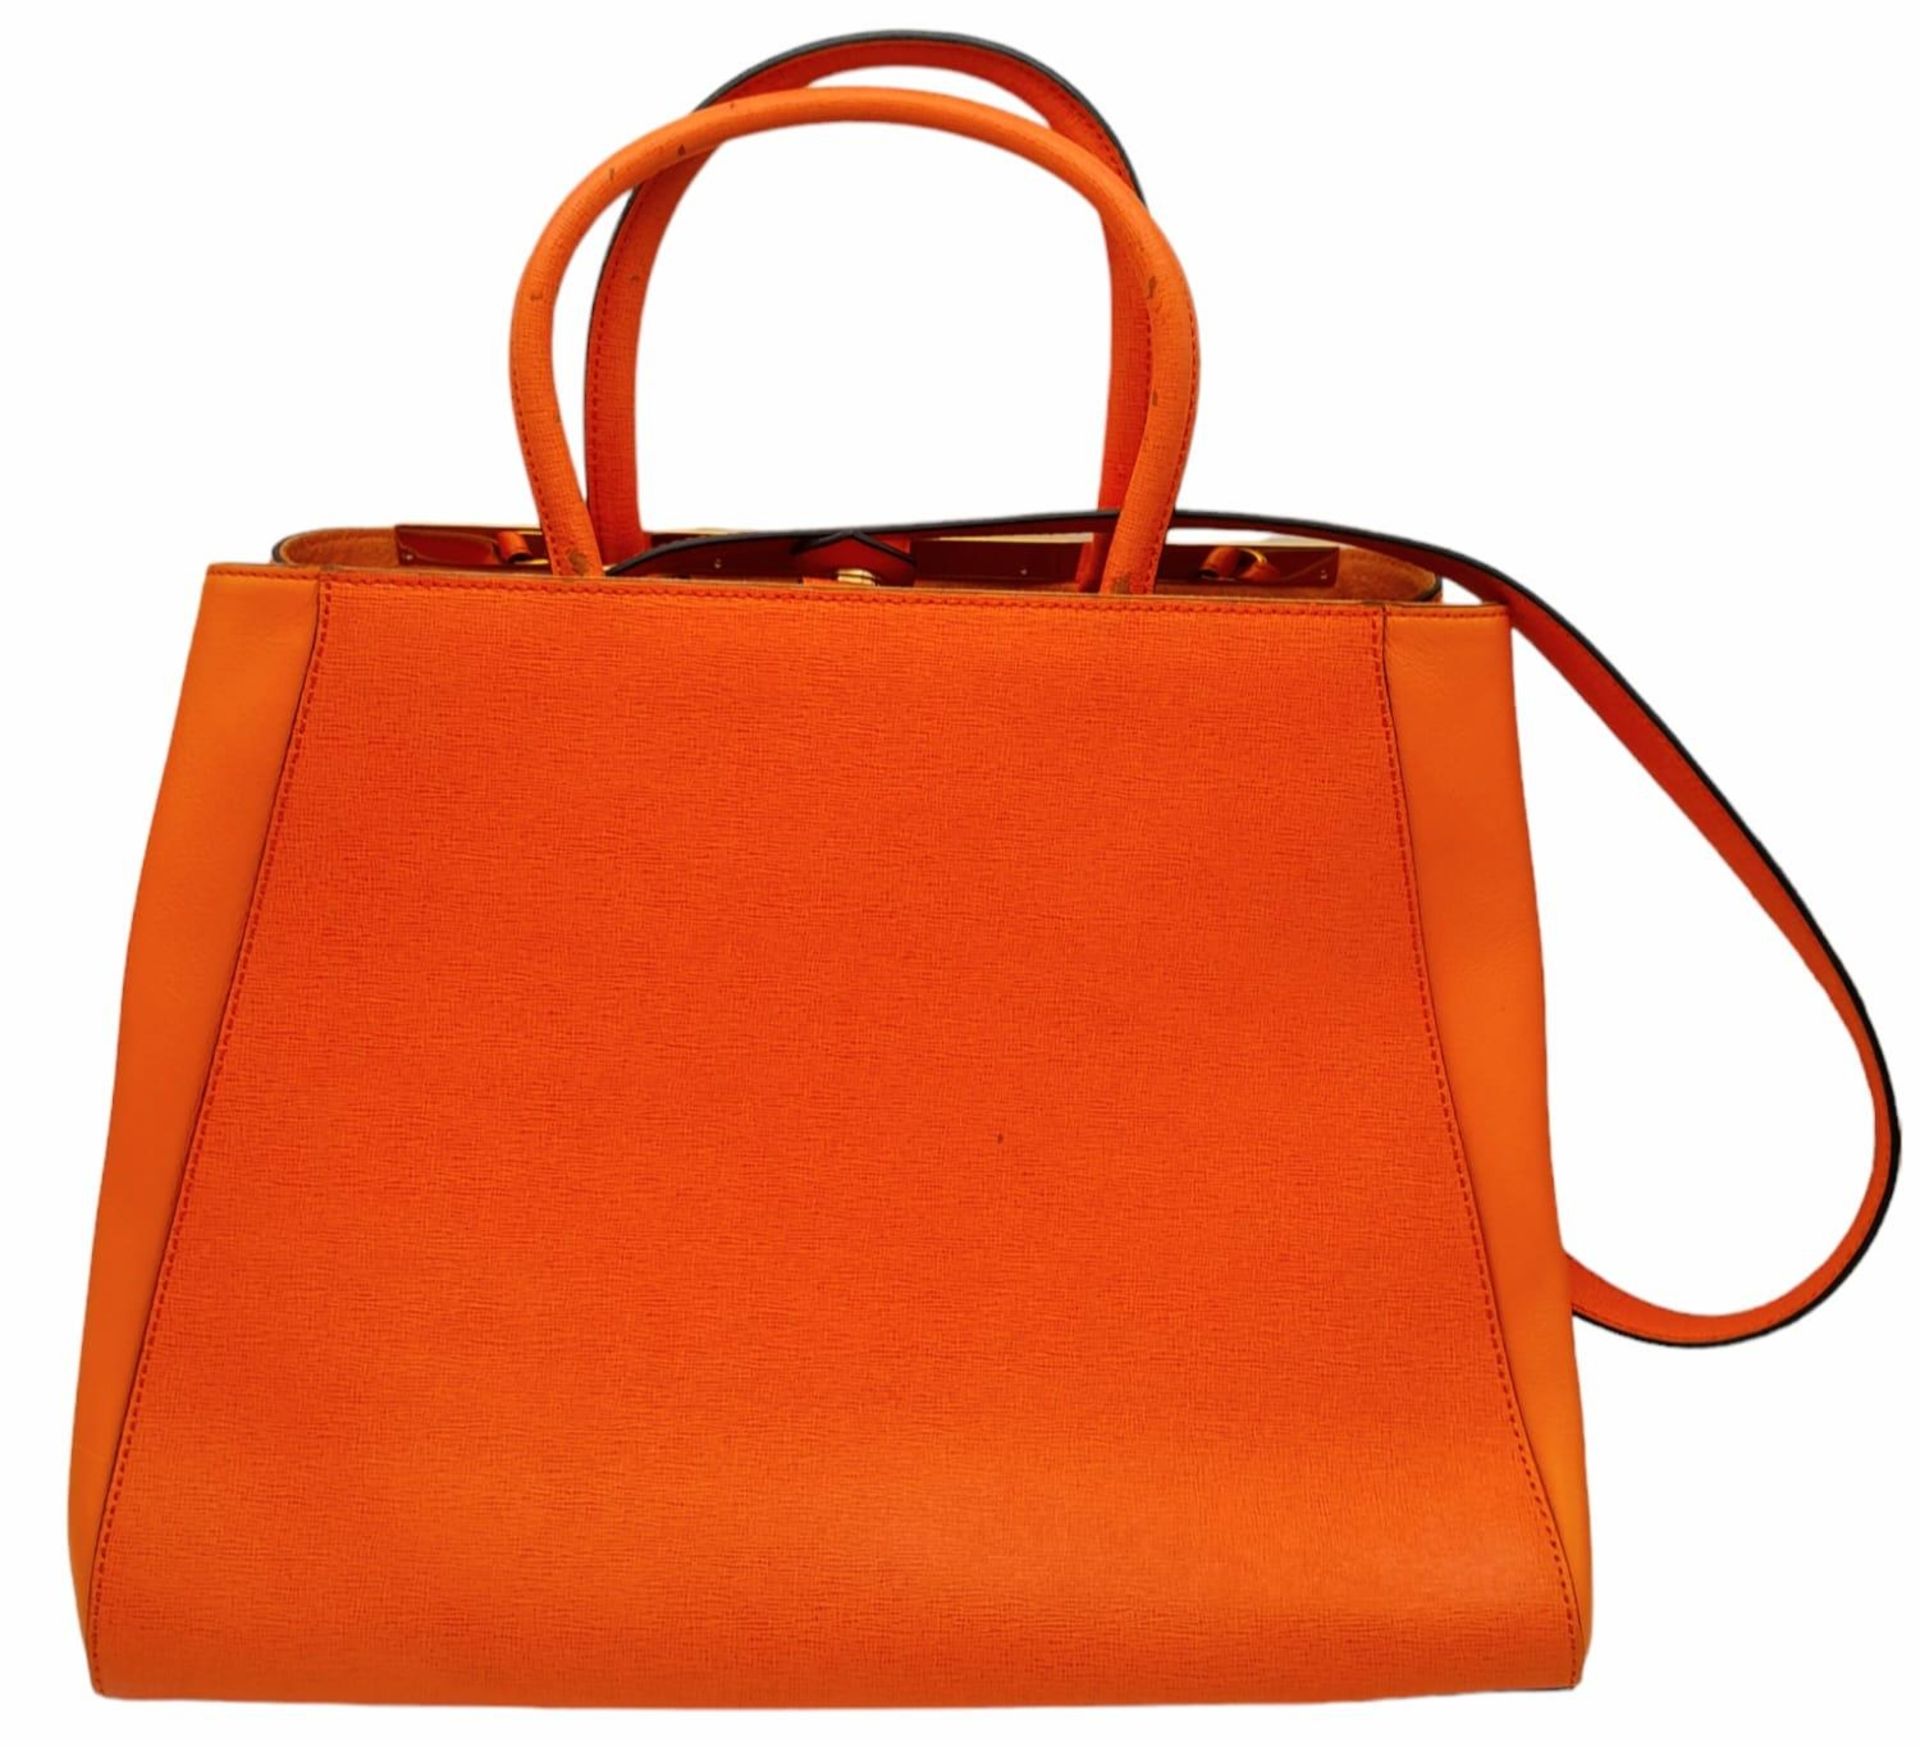 A Fendi Two Tone Orange Leather 2jours Tote Bag. Textured exterior with gold-tone hardware. Hand and - Bild 5 aus 12